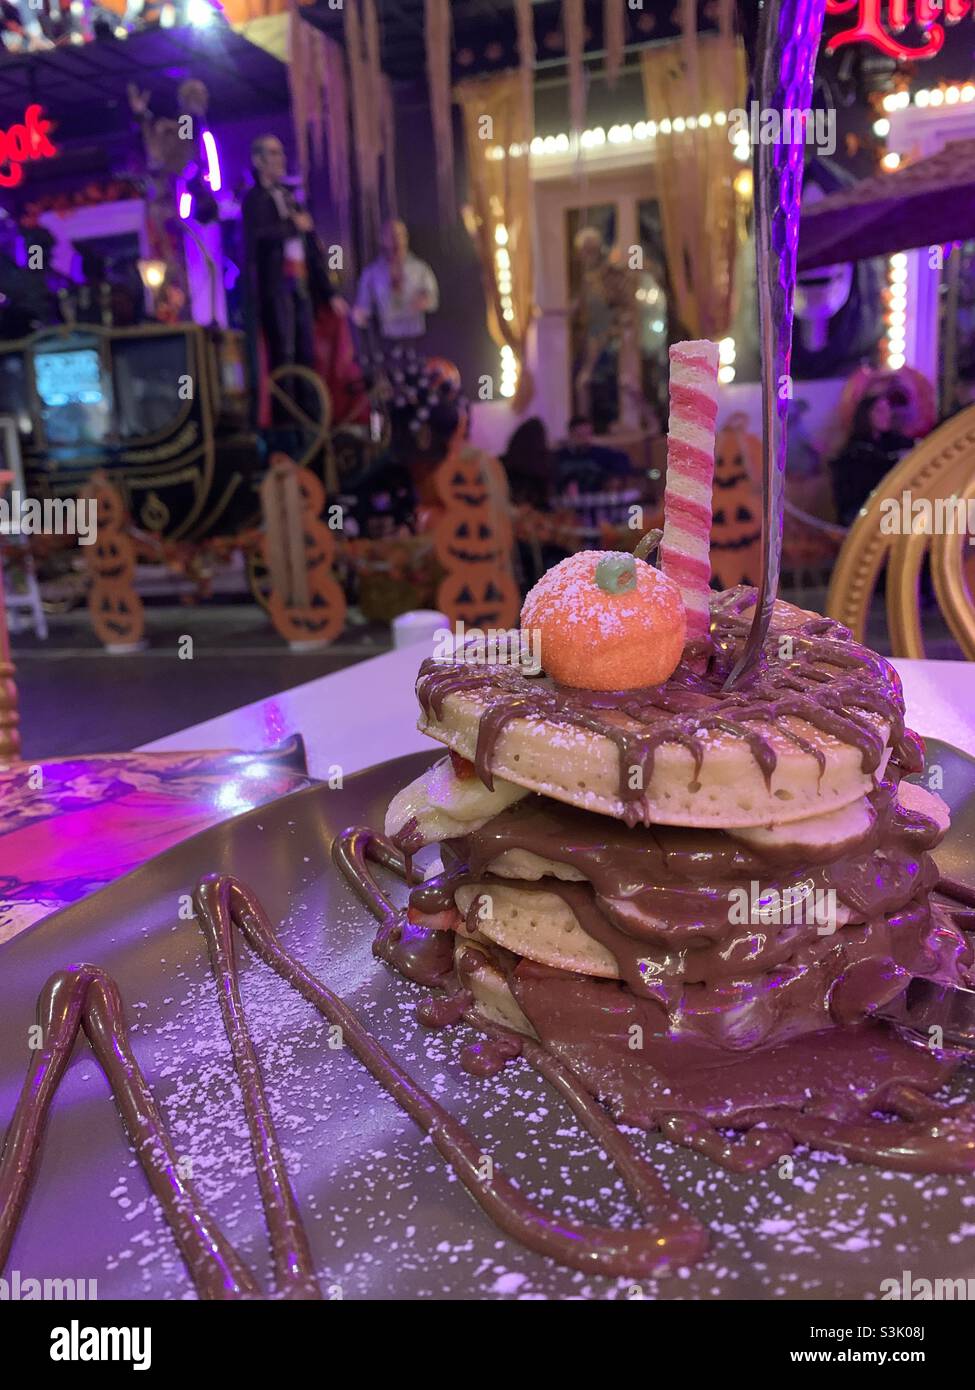 Stack of pancakes covered in chocolate sauce with Halloween figurines in the background Stock Photo